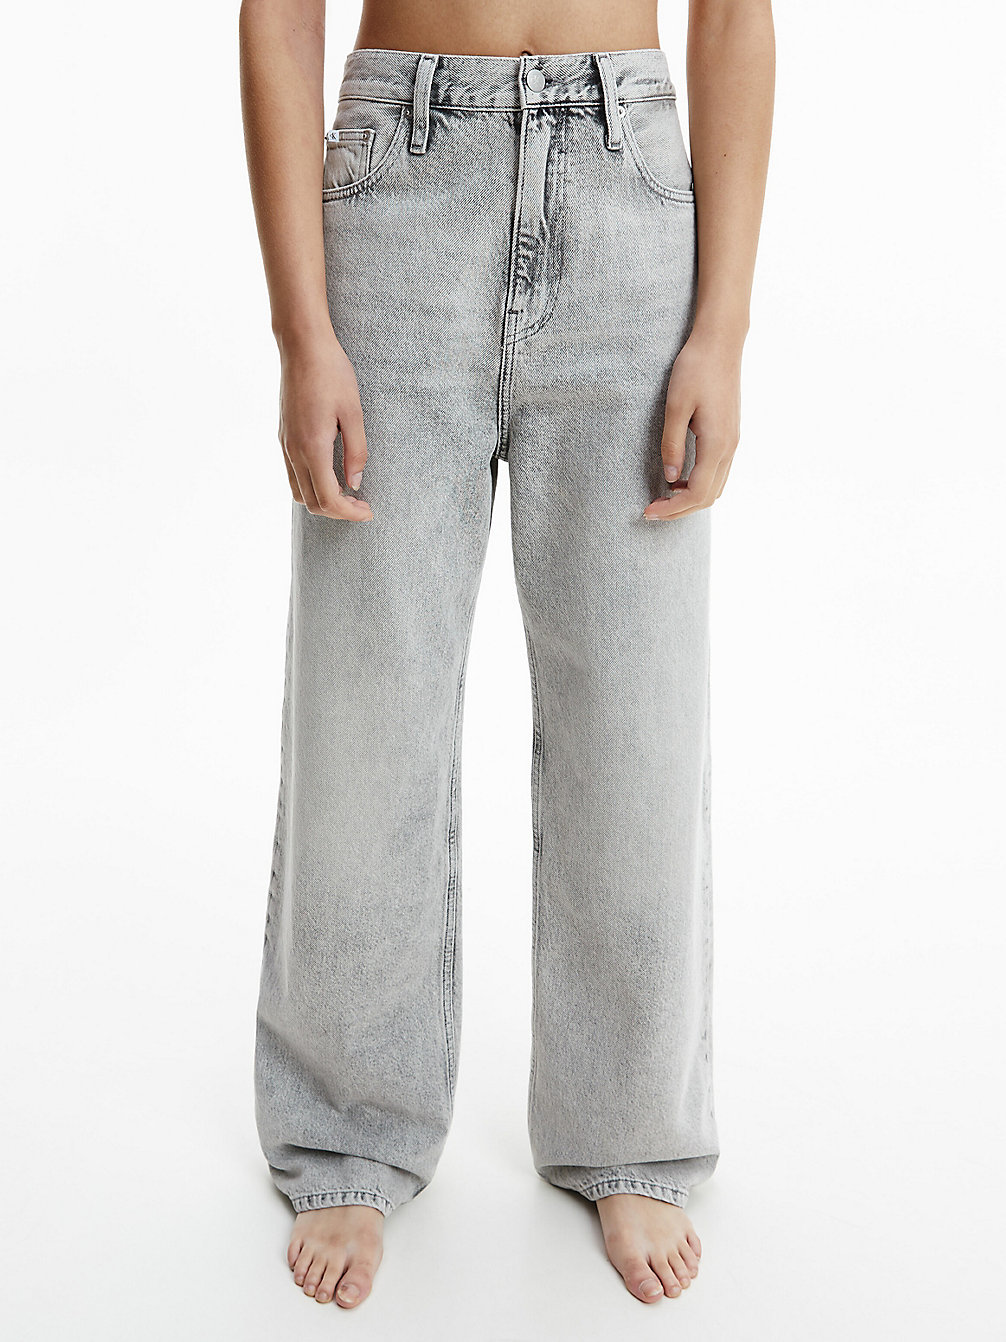 DENIM GREY > Jeansy Relaxed High Rise > undefined Kobiety - Calvin Klein